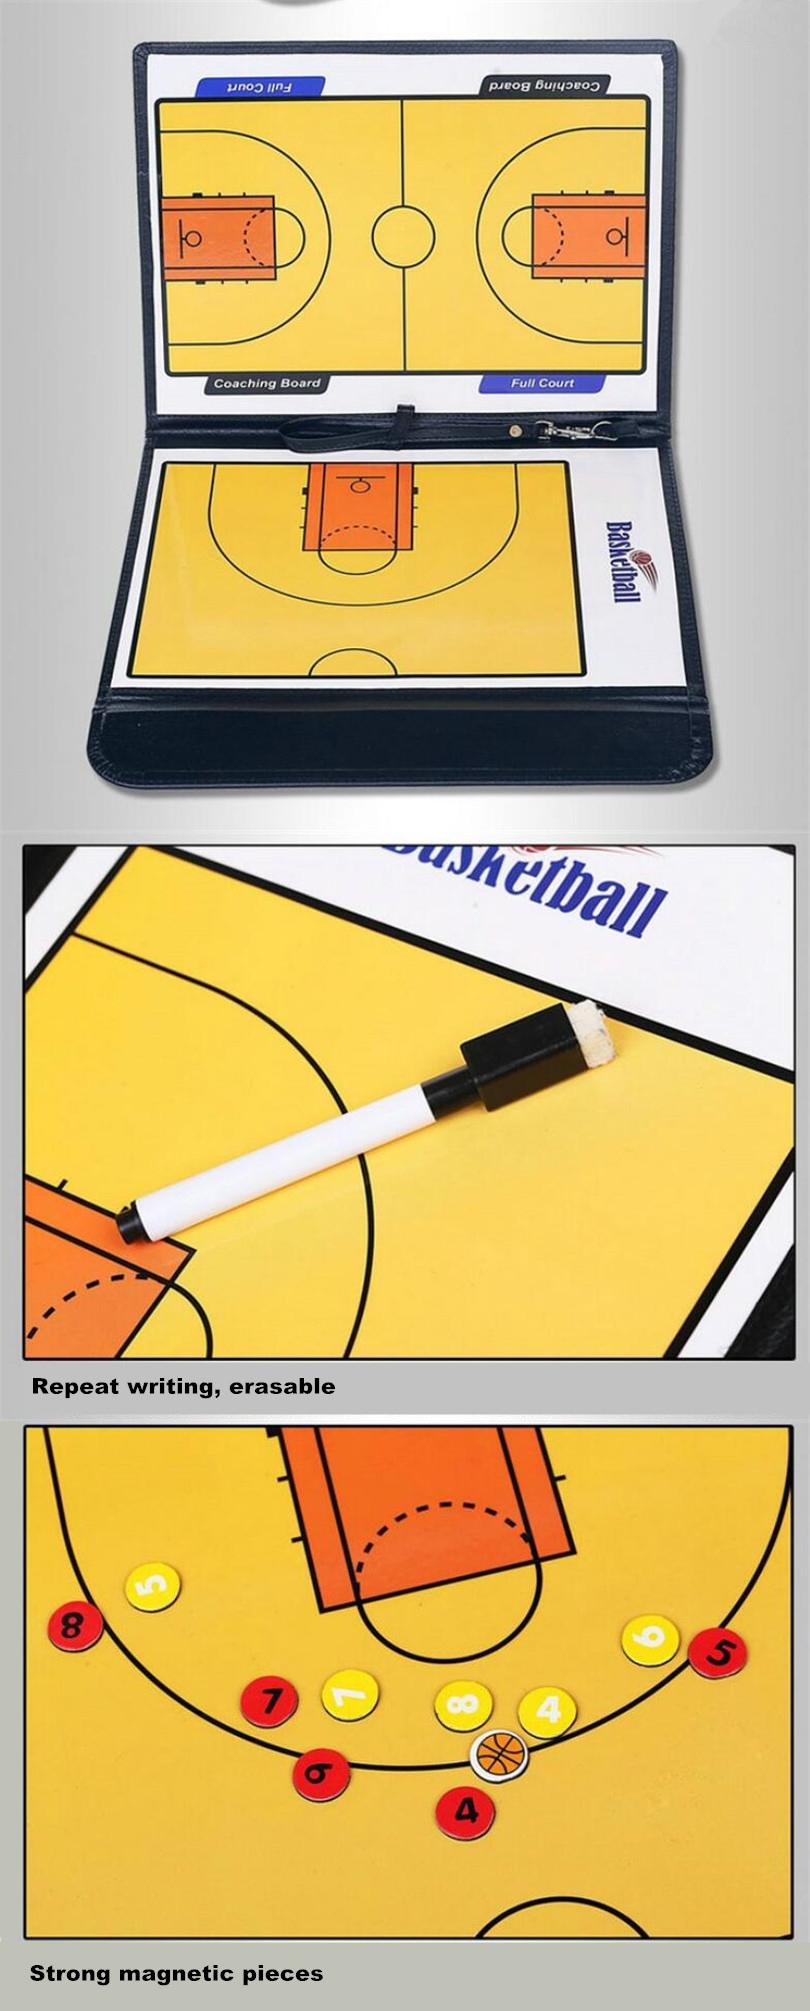 Folding-Magnetic-Piece-Basketball-Coach-Board-Tactical-Plate-Tactics-Book-Set-With-Pen-Teaching-Clip-1083127